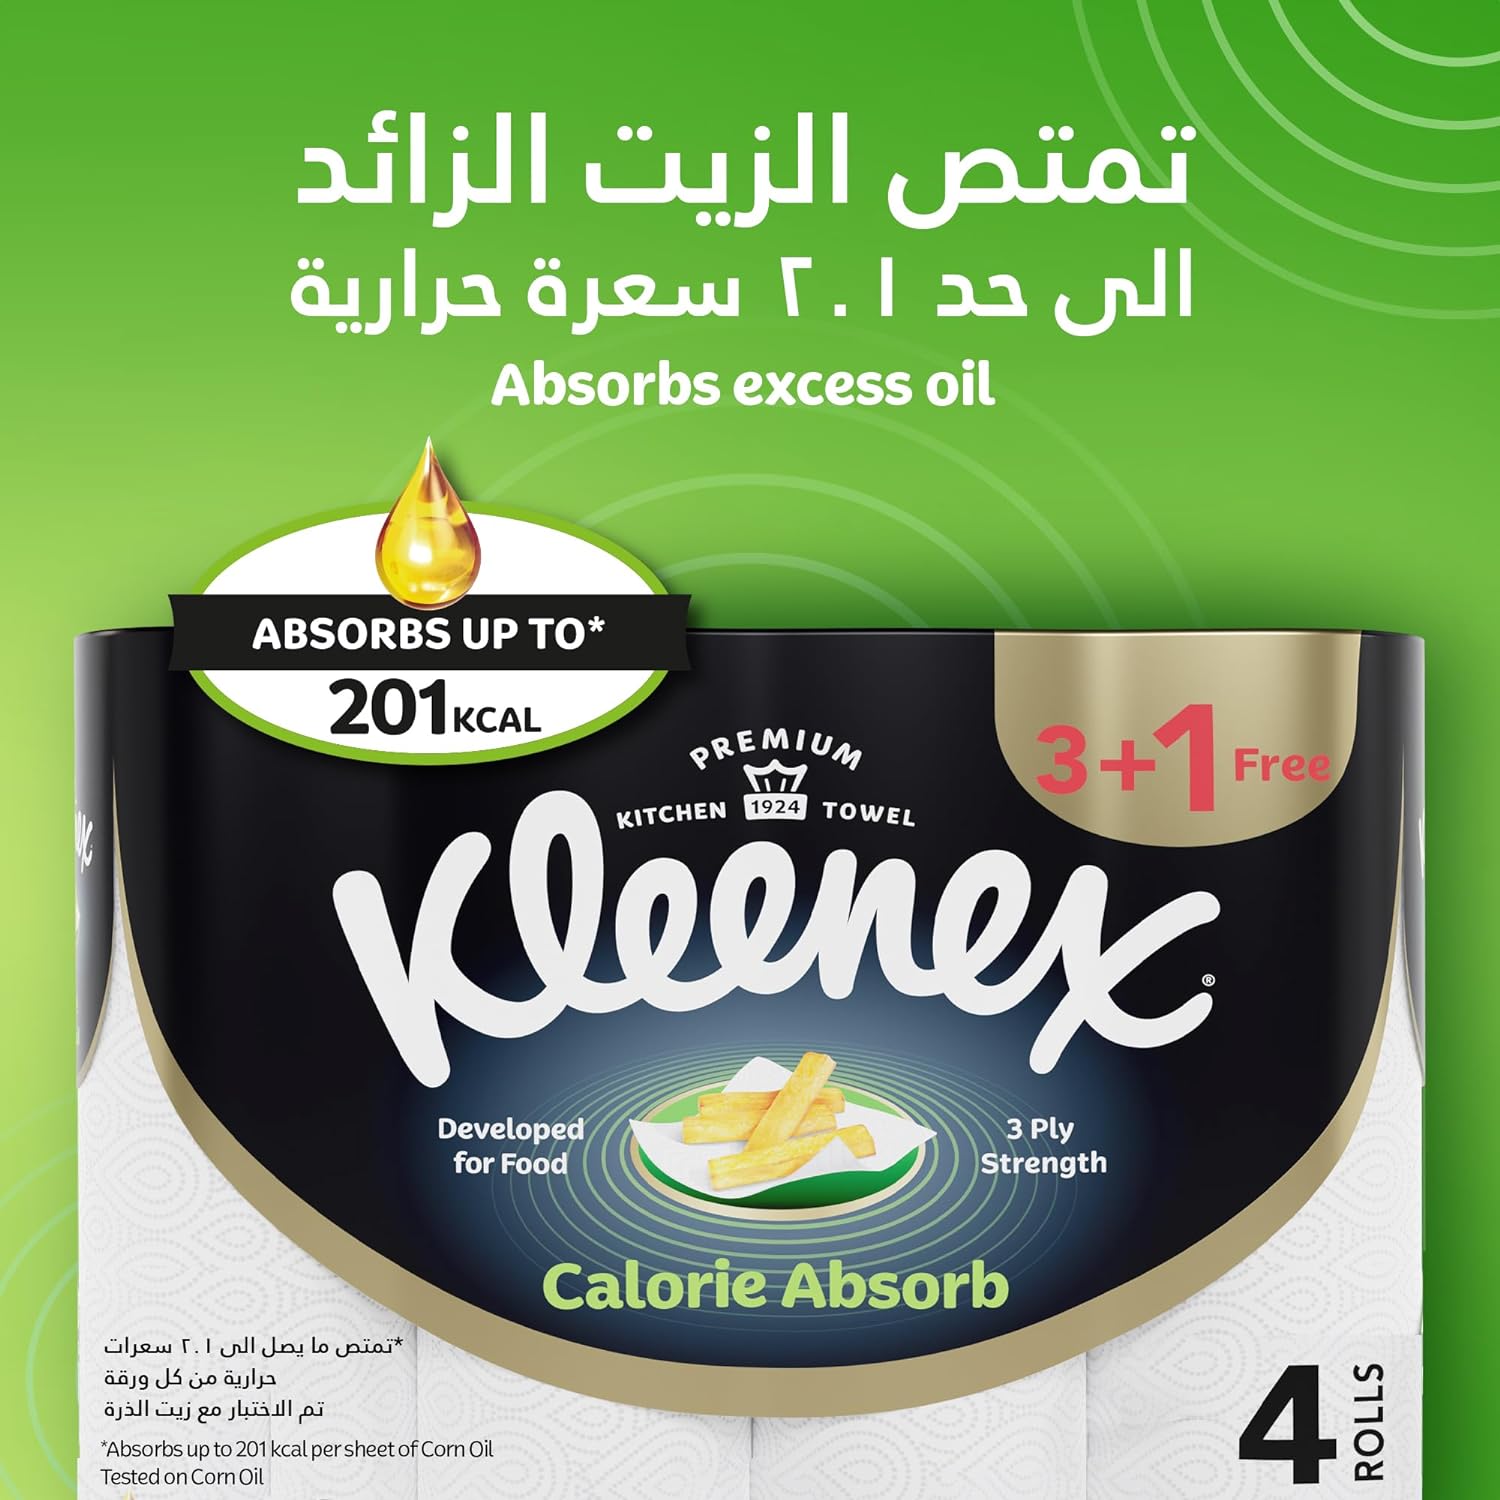 Kleenex Kitchen Paper Towel Calorie Absorb 3 ply 50sheets - Pack of 4